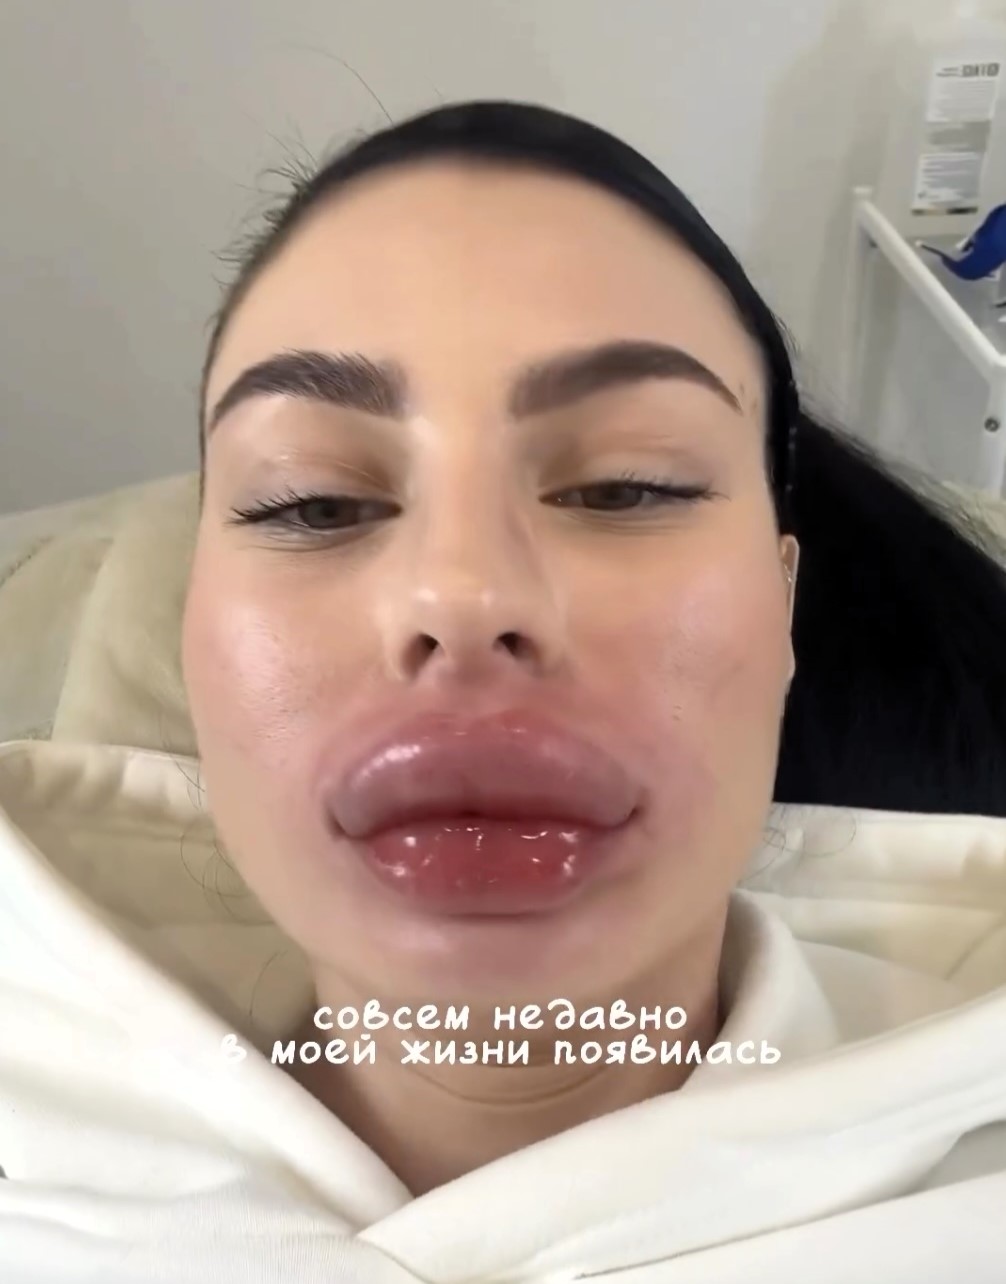 Influencer Sofia Bolshakova, 23, was left looking like Snoopy after a severe allergic reaction to lip filler removal. Thanks to quick action, she's now recovering and warning others.